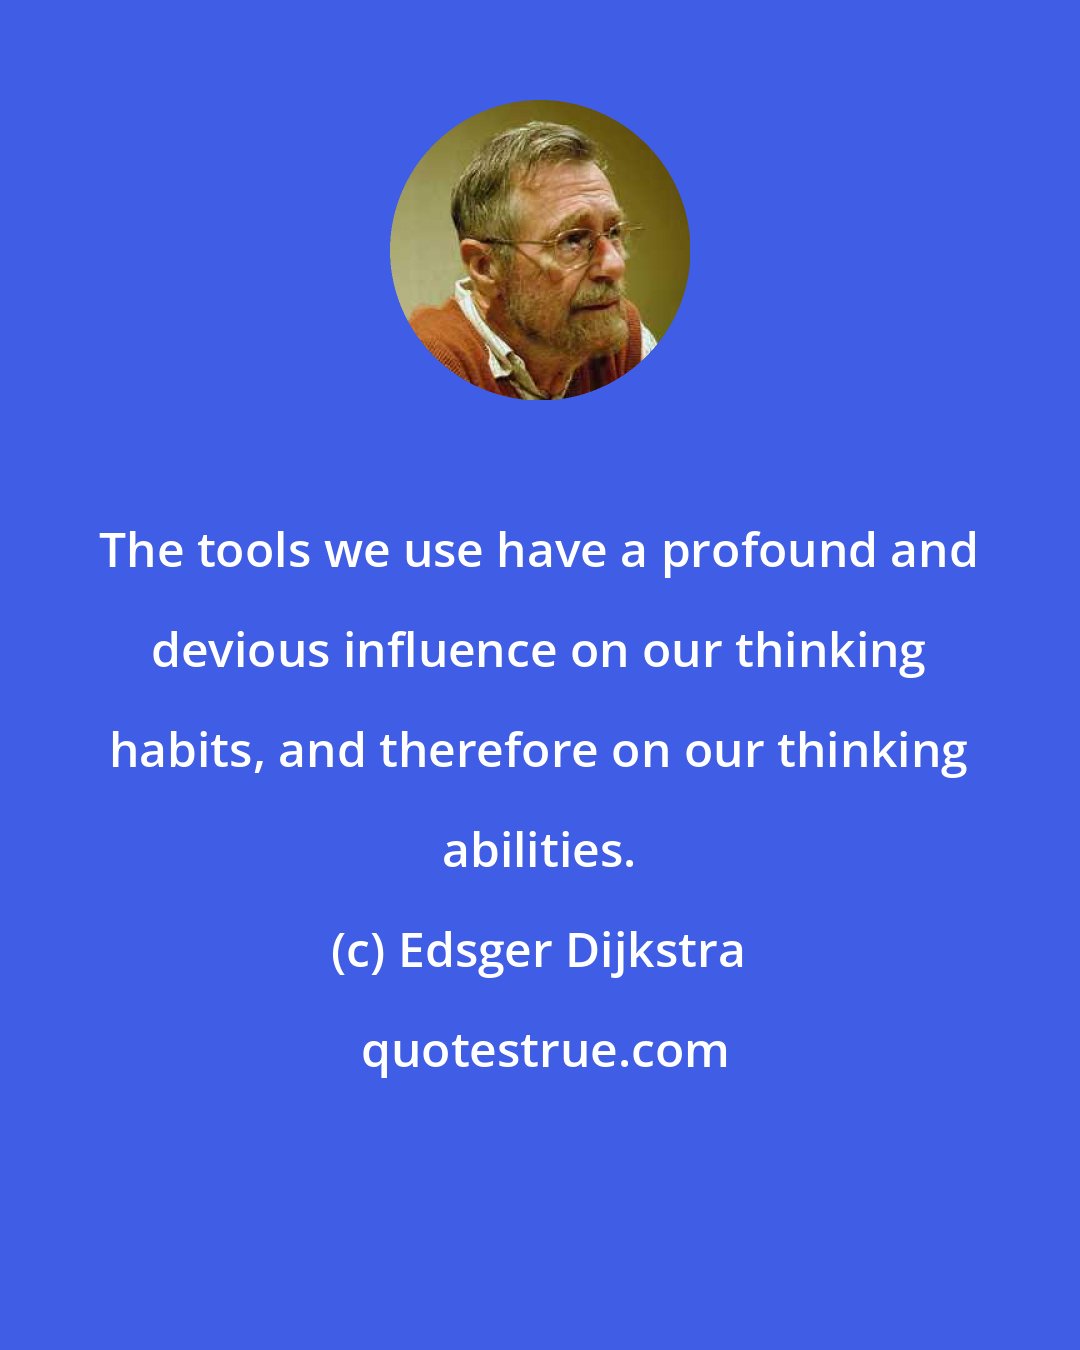 Edsger Dijkstra: The tools we use have a profound and devious influence on our thinking habits, and therefore on our thinking abilities.